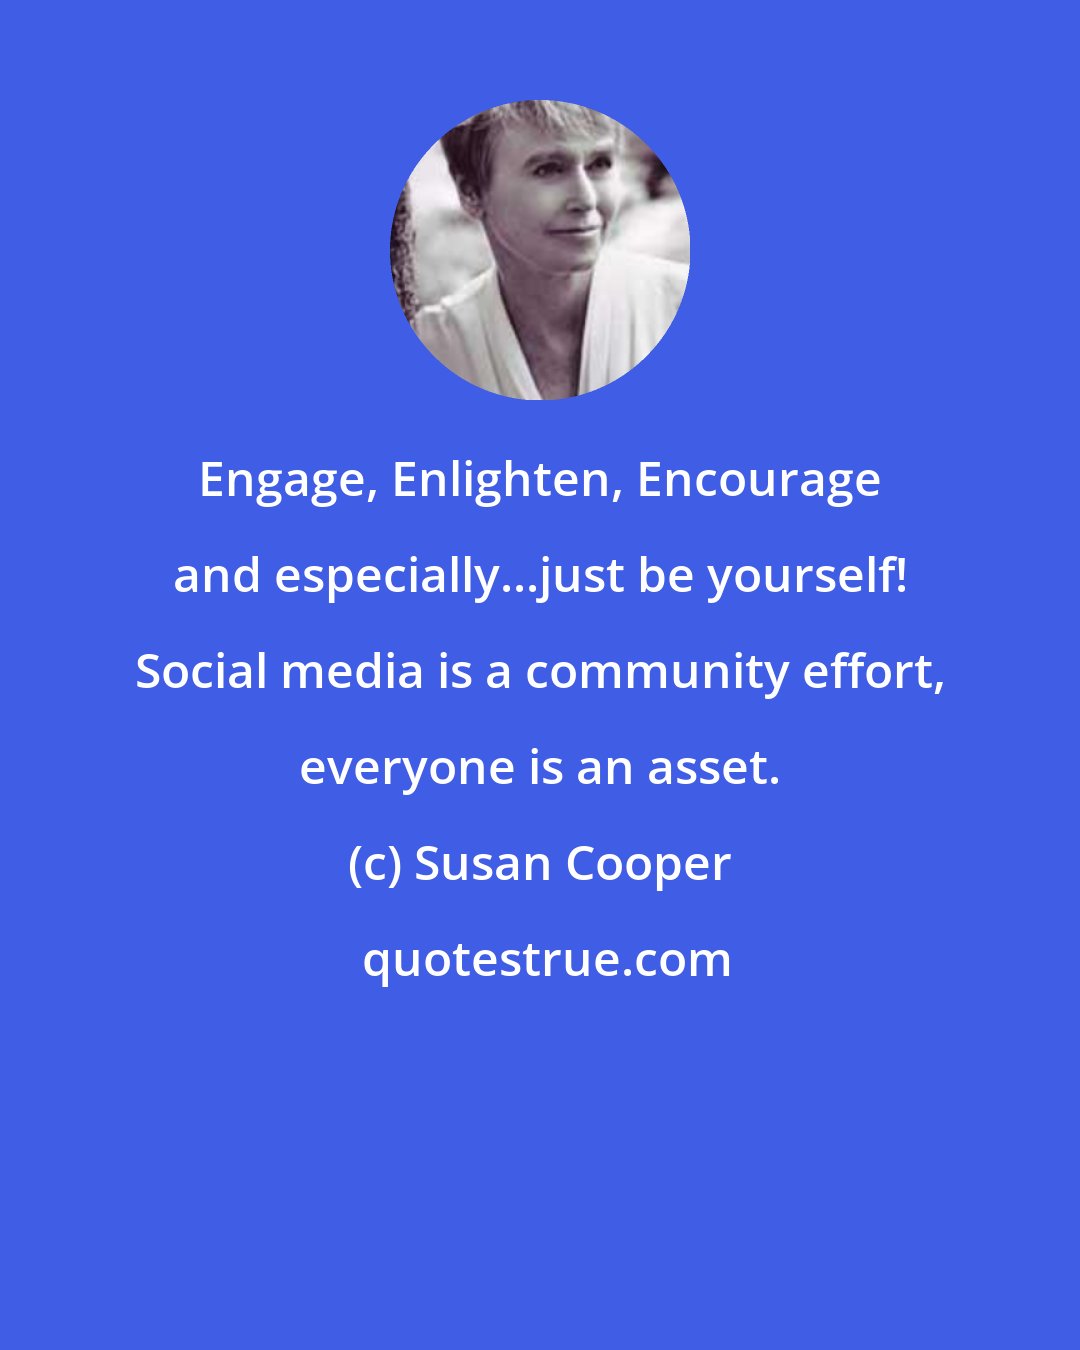 Susan Cooper: Engage, Enlighten, Encourage and especially...just be yourself! Social media is a community effort, everyone is an asset.